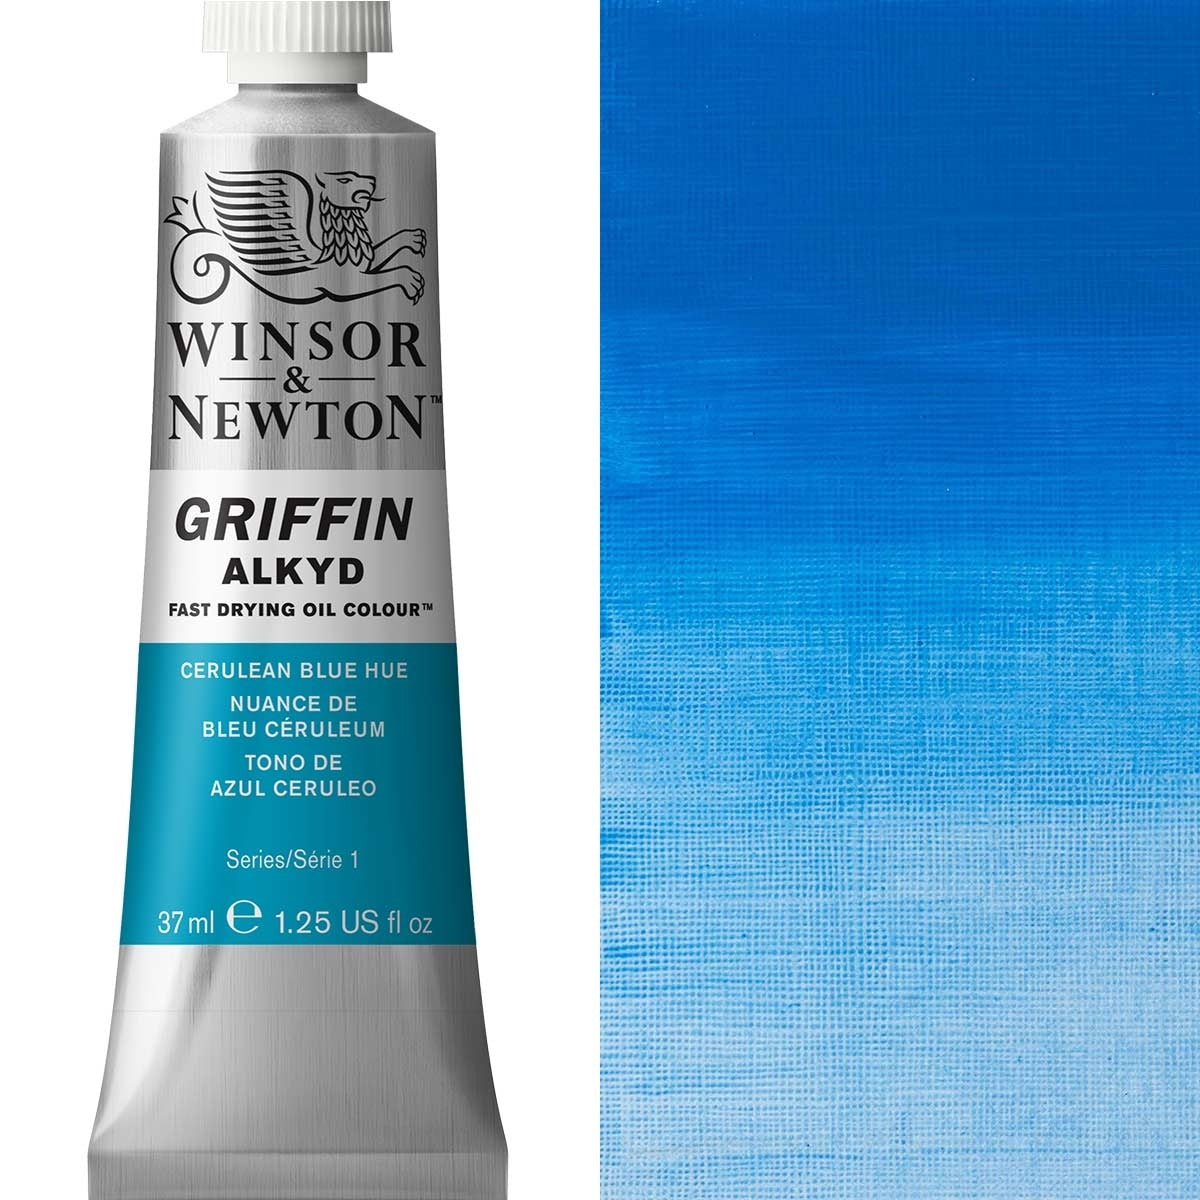 Winsor and Newton - Griffin ALKYD Oil Colour - 37ml - Cerulean Blue Hue